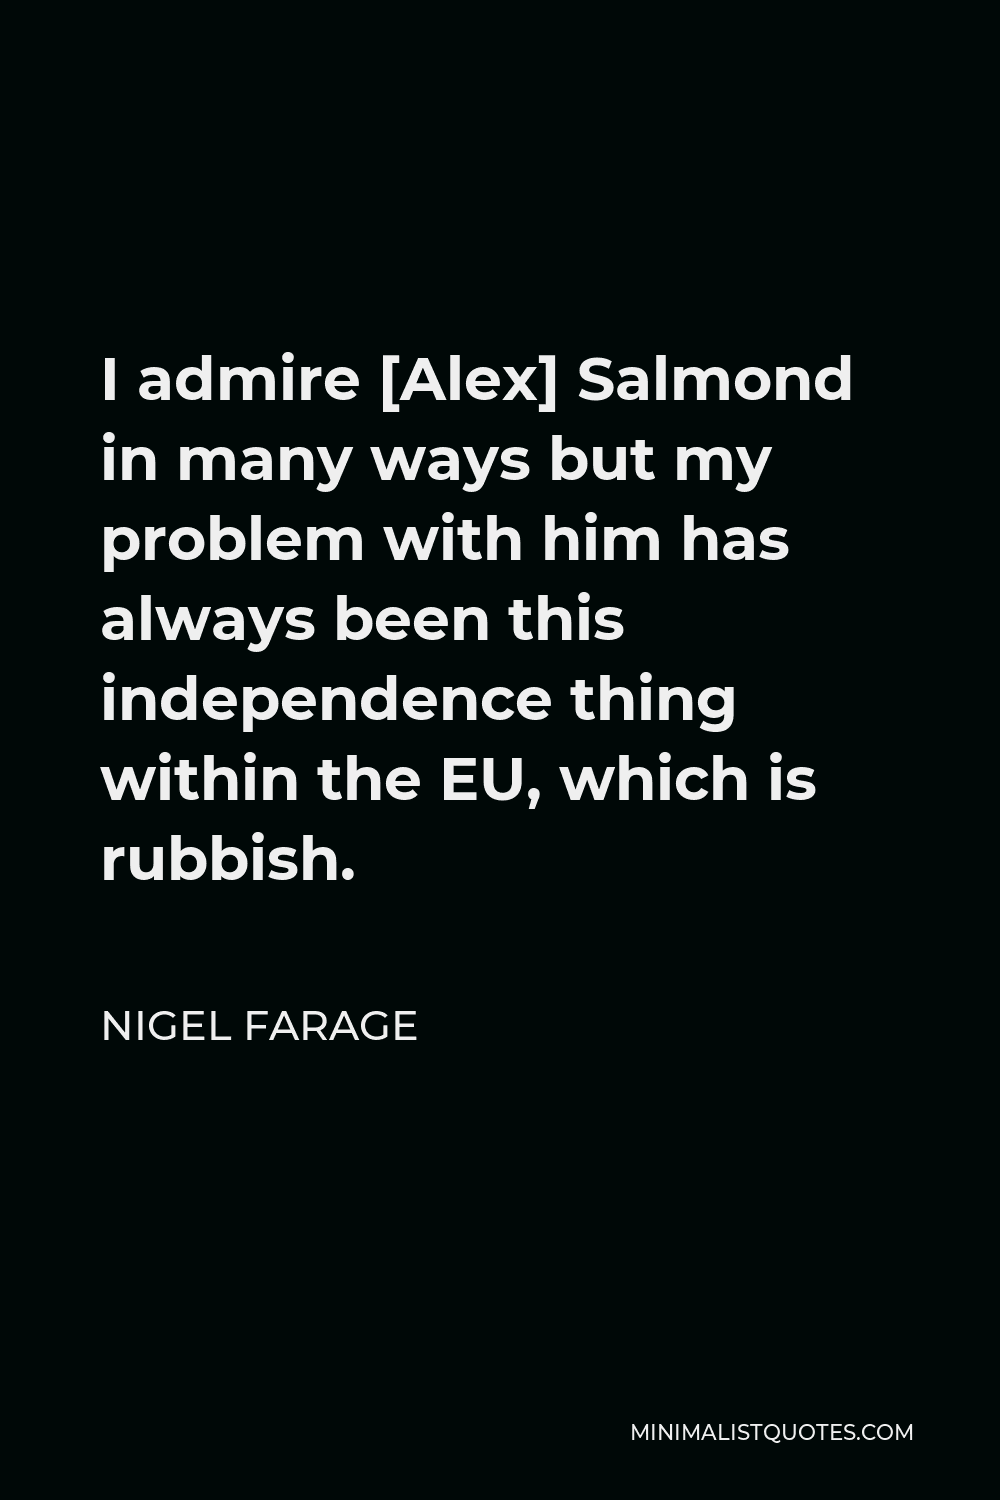 Nigel Farage Quote - I admire [Alex] Salmond in many ways but my problem with him has always been this independence thing within the EU, which is rubbish.